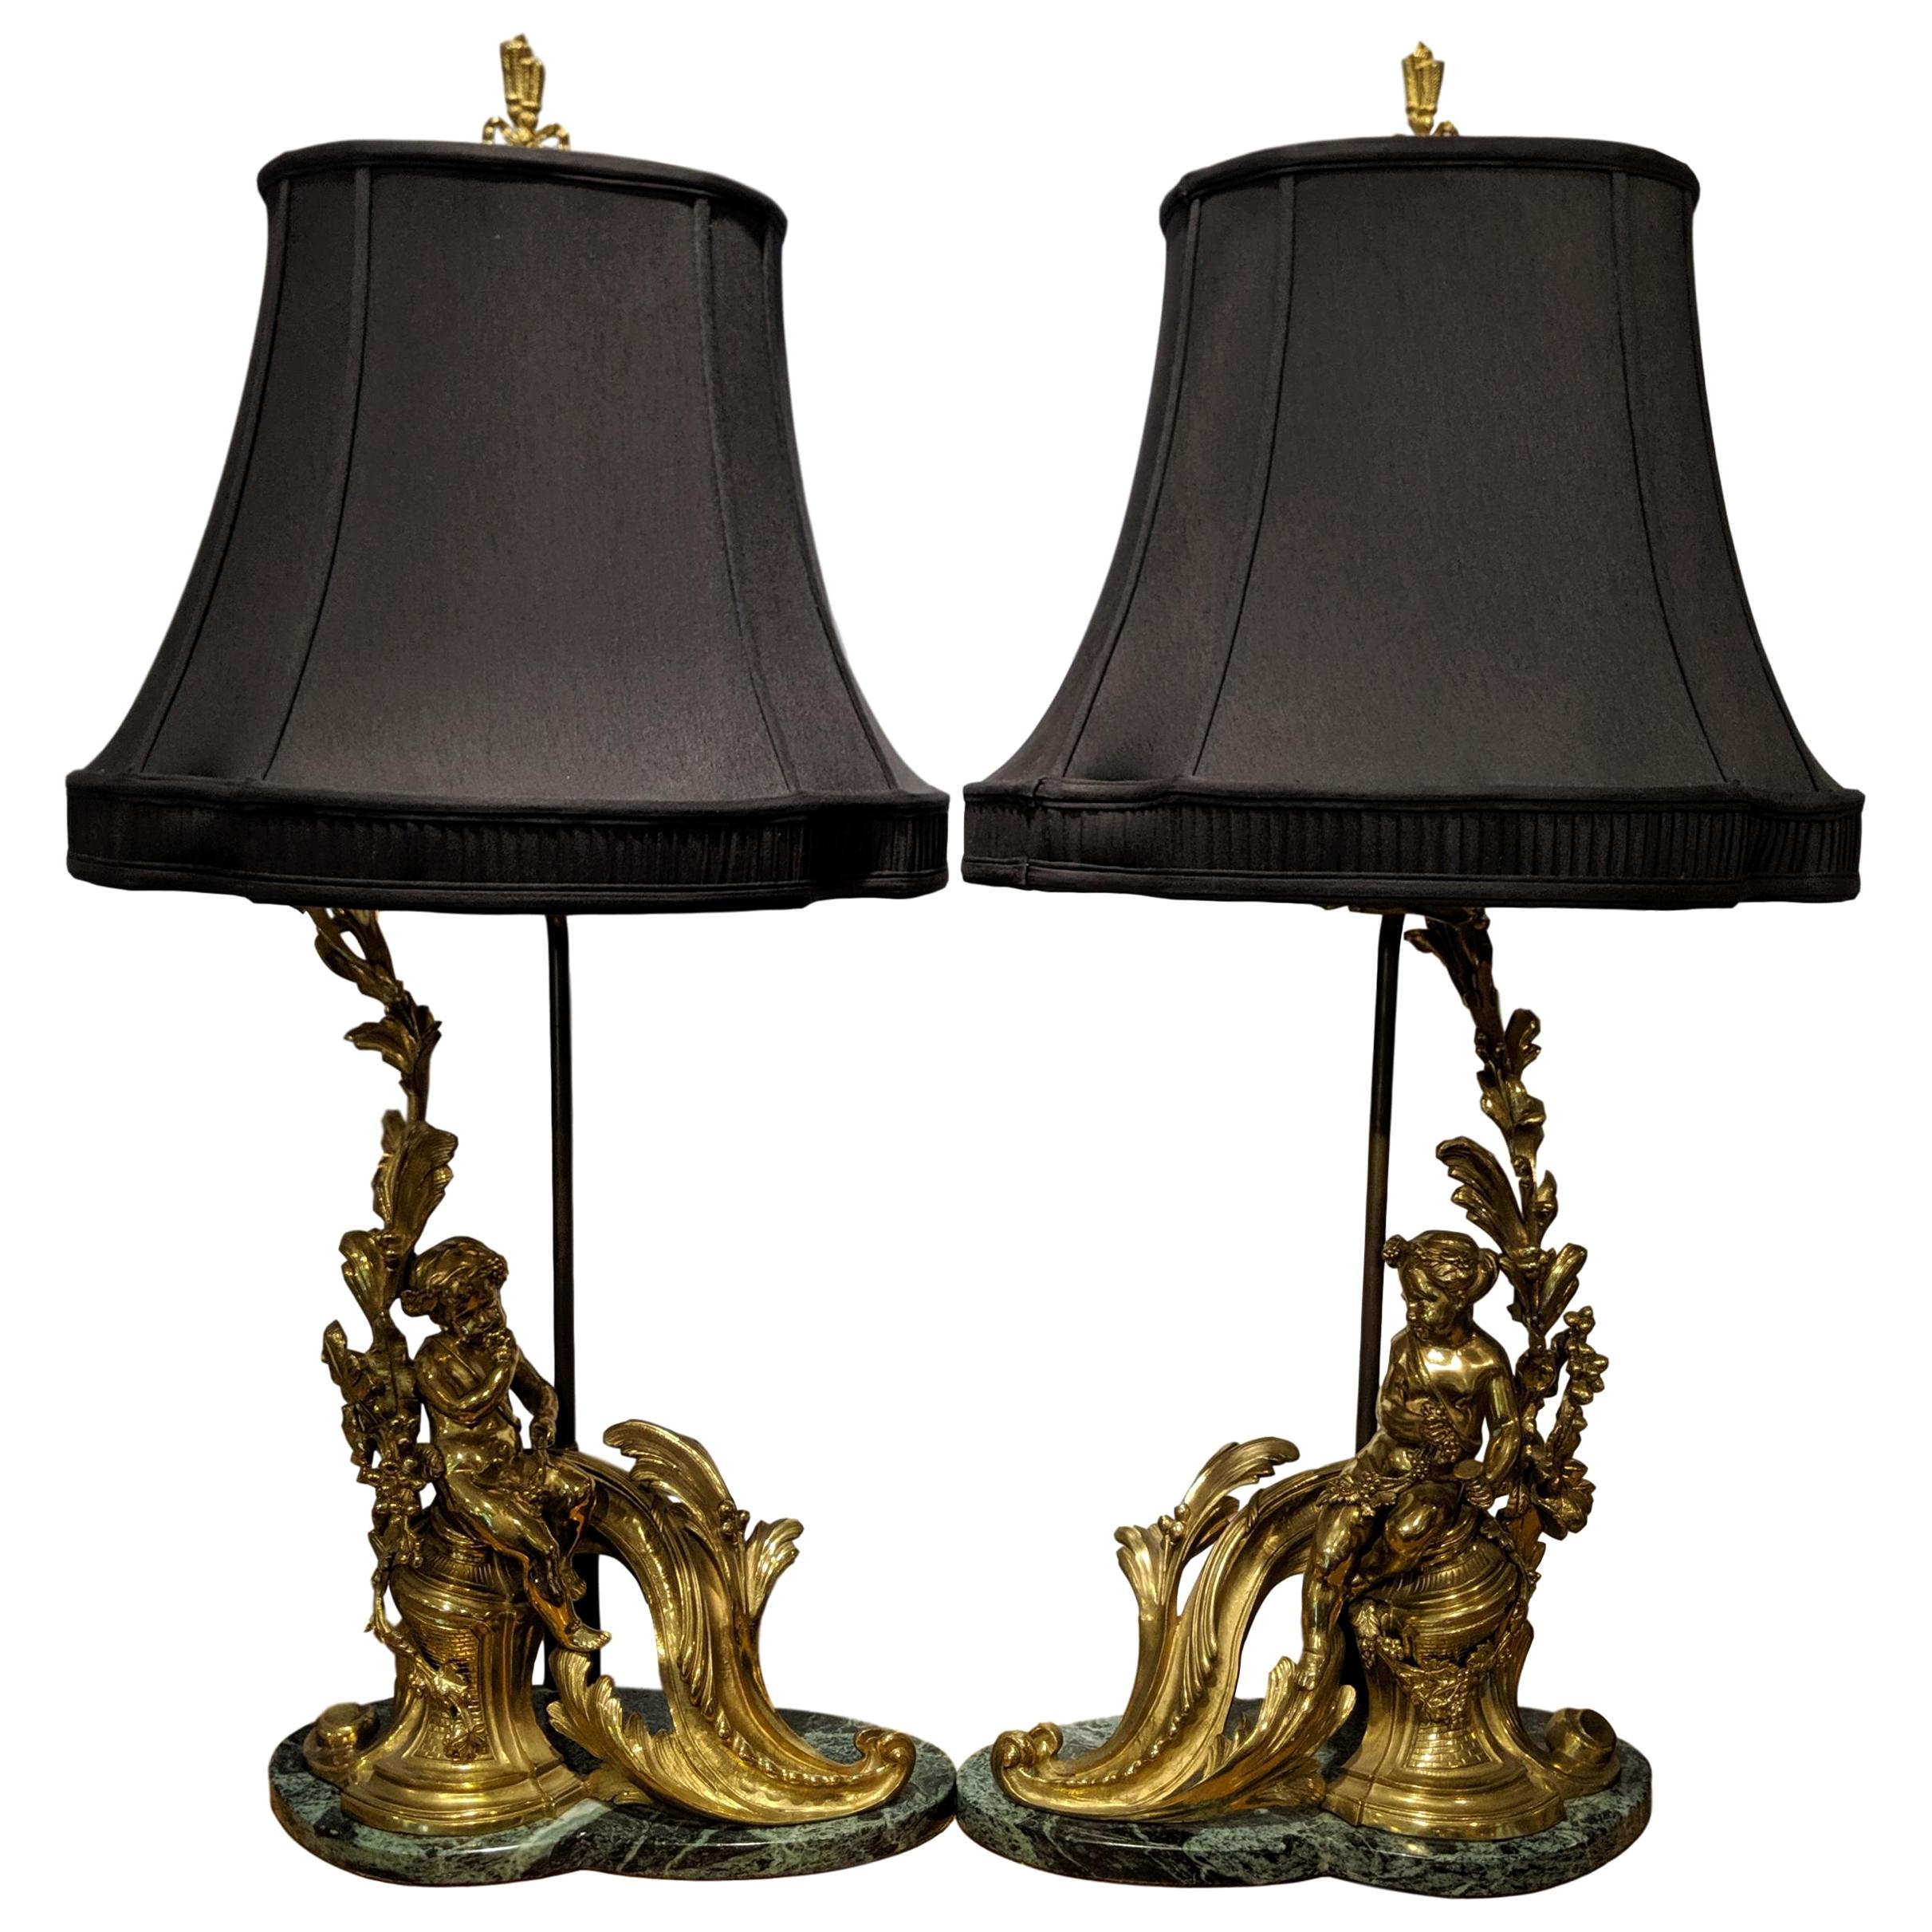 Pair of 19th Century French Ormolu Chenet Lamps